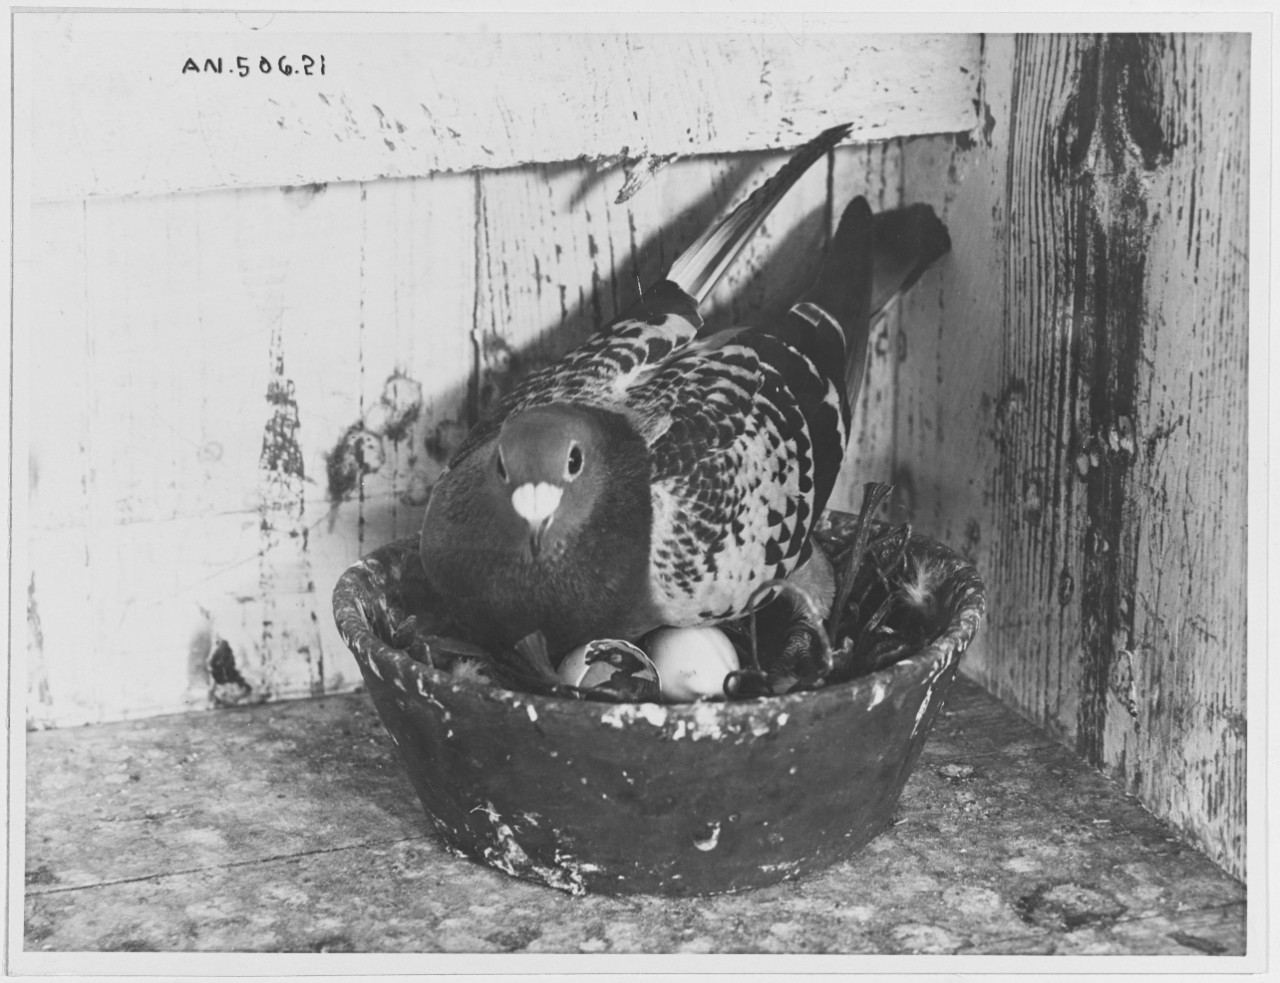 Carrier Pigeon mother sitting on eggs in the nest bowl.